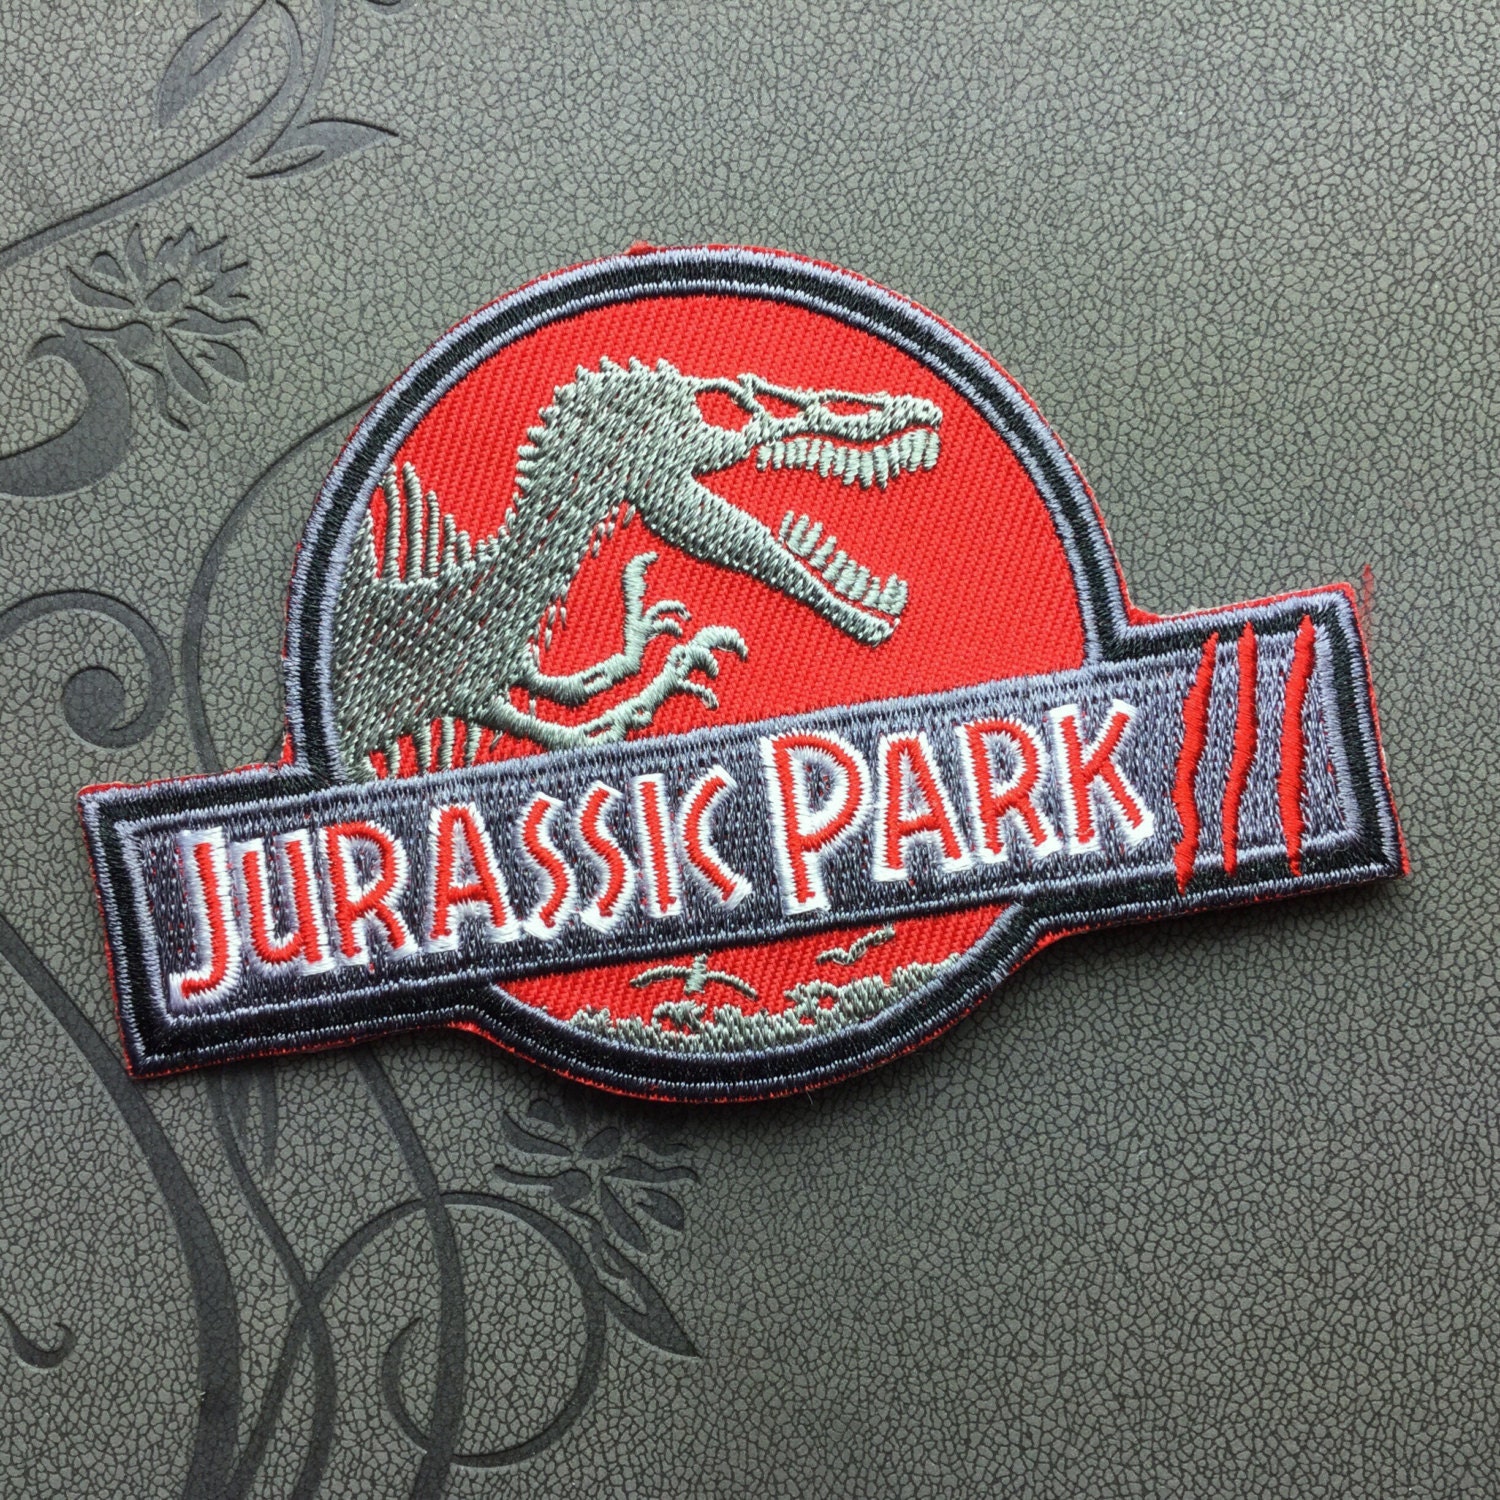 jurassic-park-badge-patch-embroidered-iron-on-patch-sew-on-patches-iron